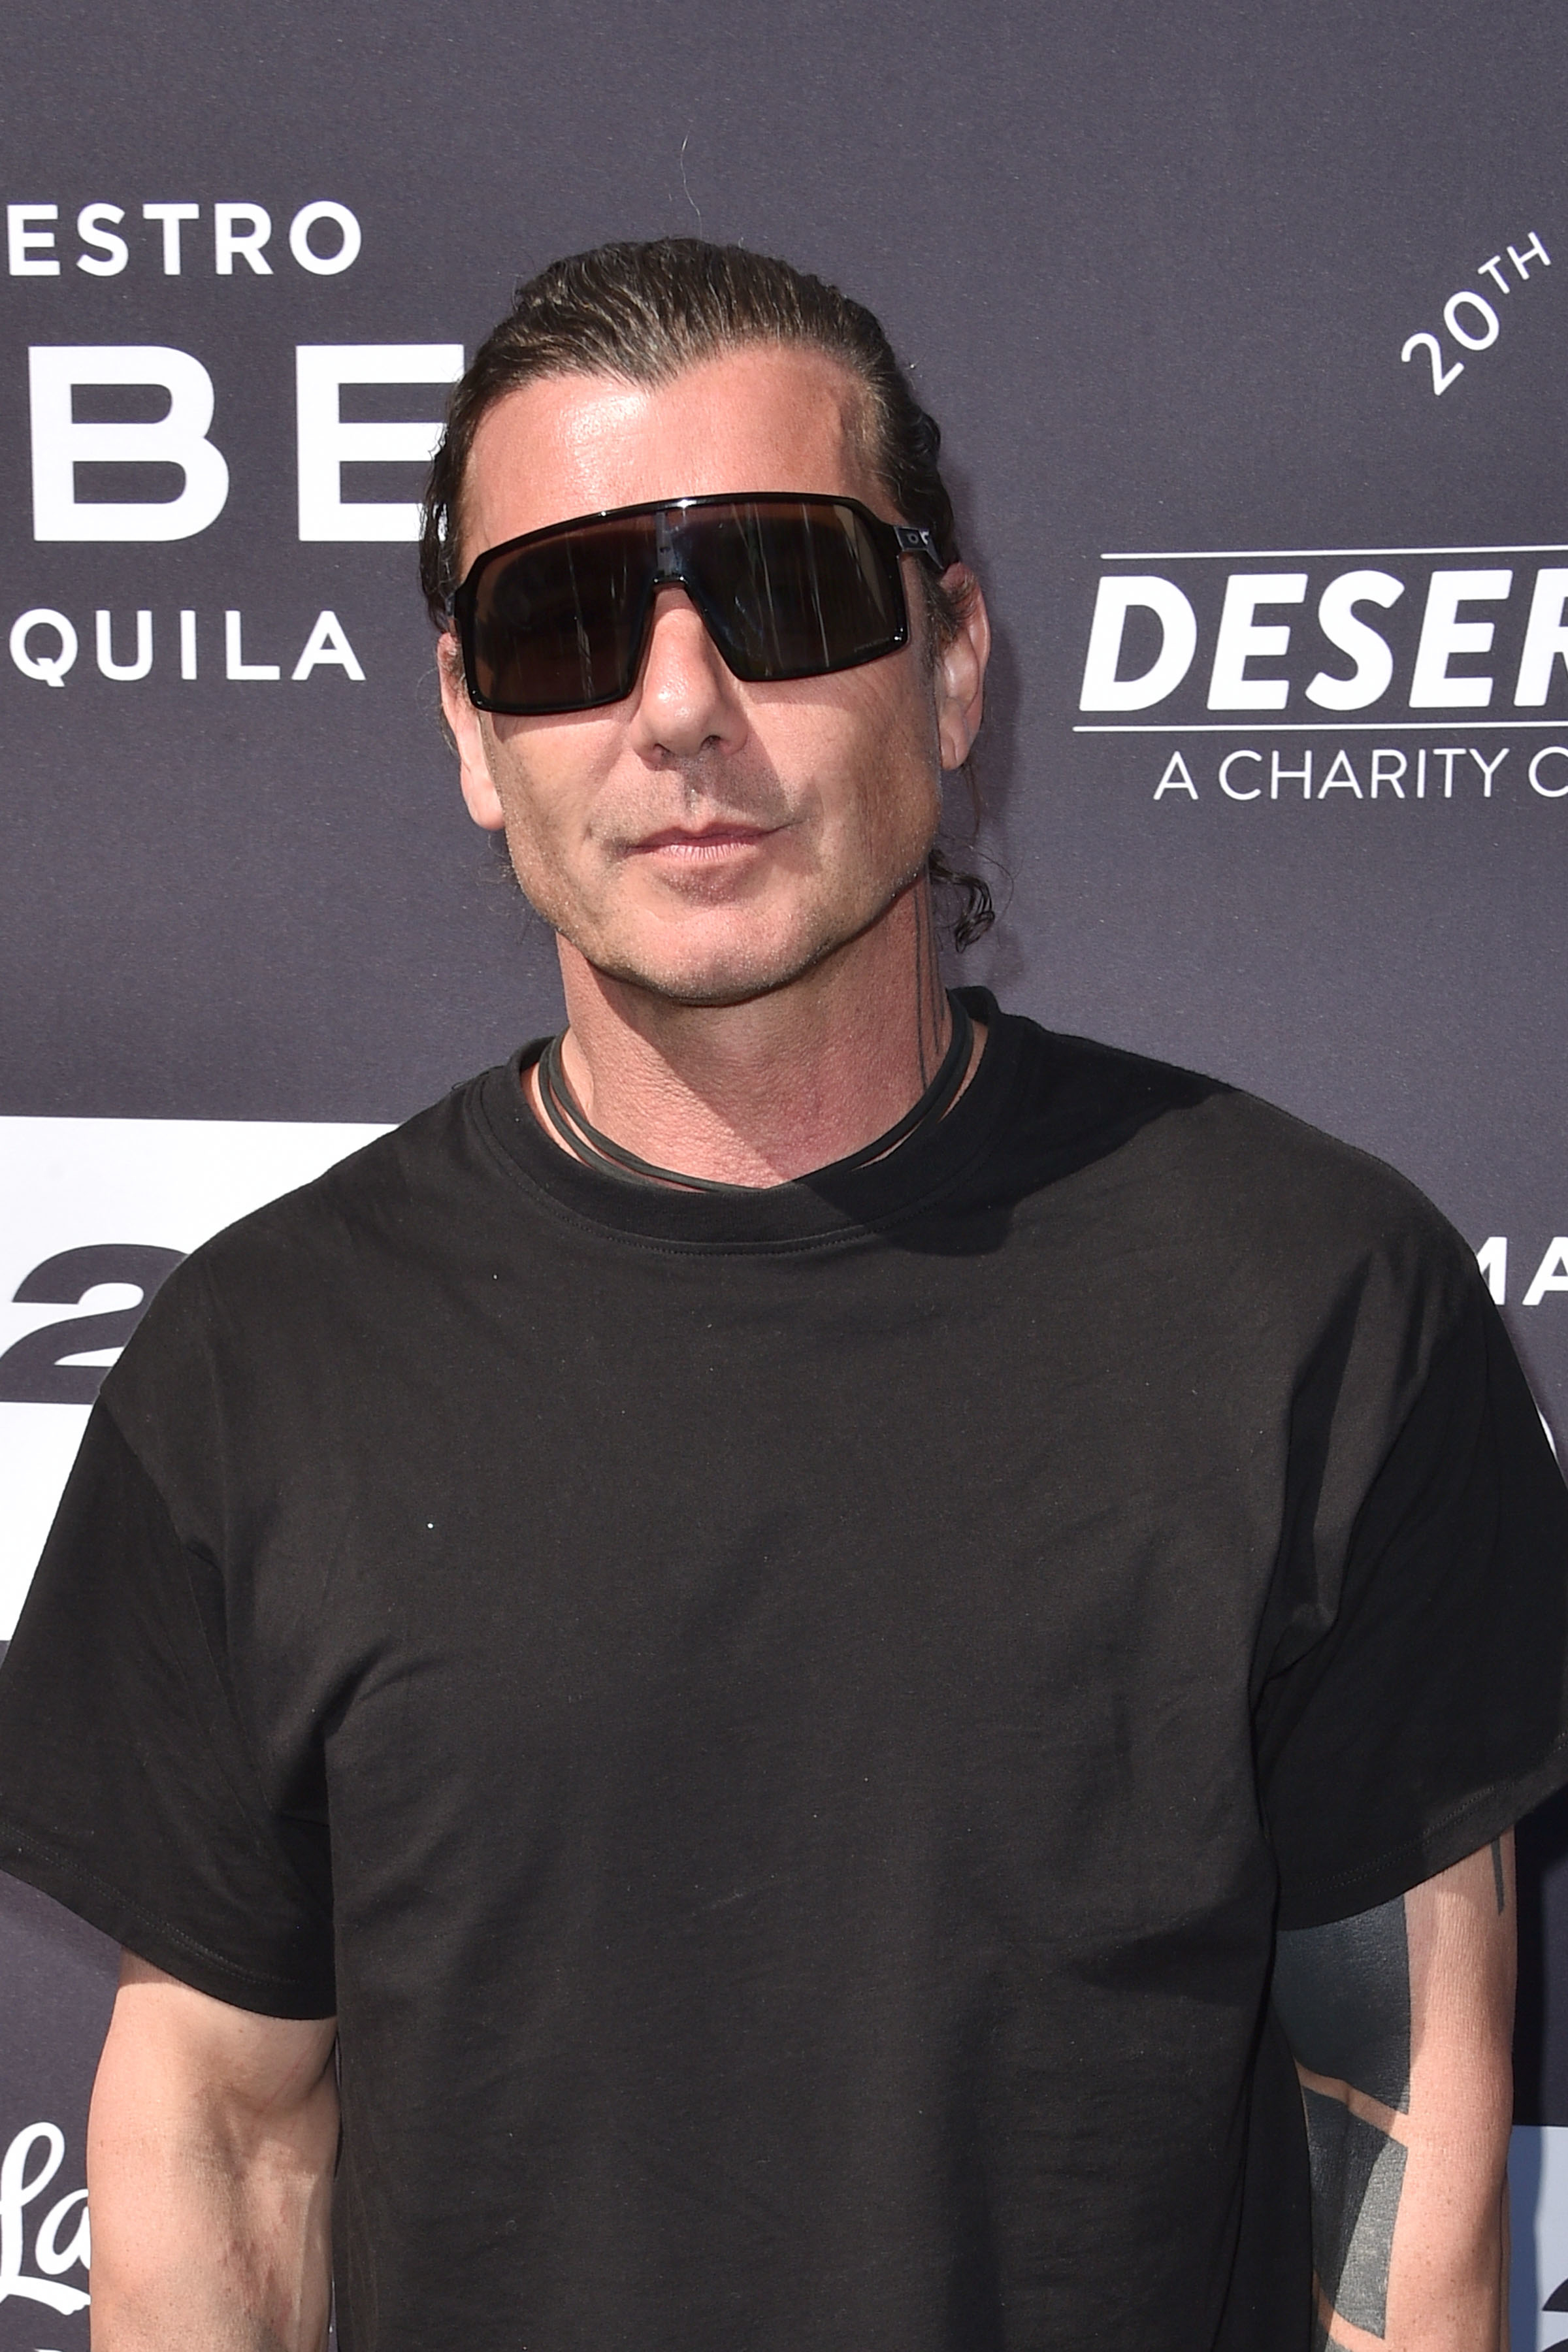 Gavin Rossdale stands with a neutral expression, wearing a black T-shirt and dark sunglasses